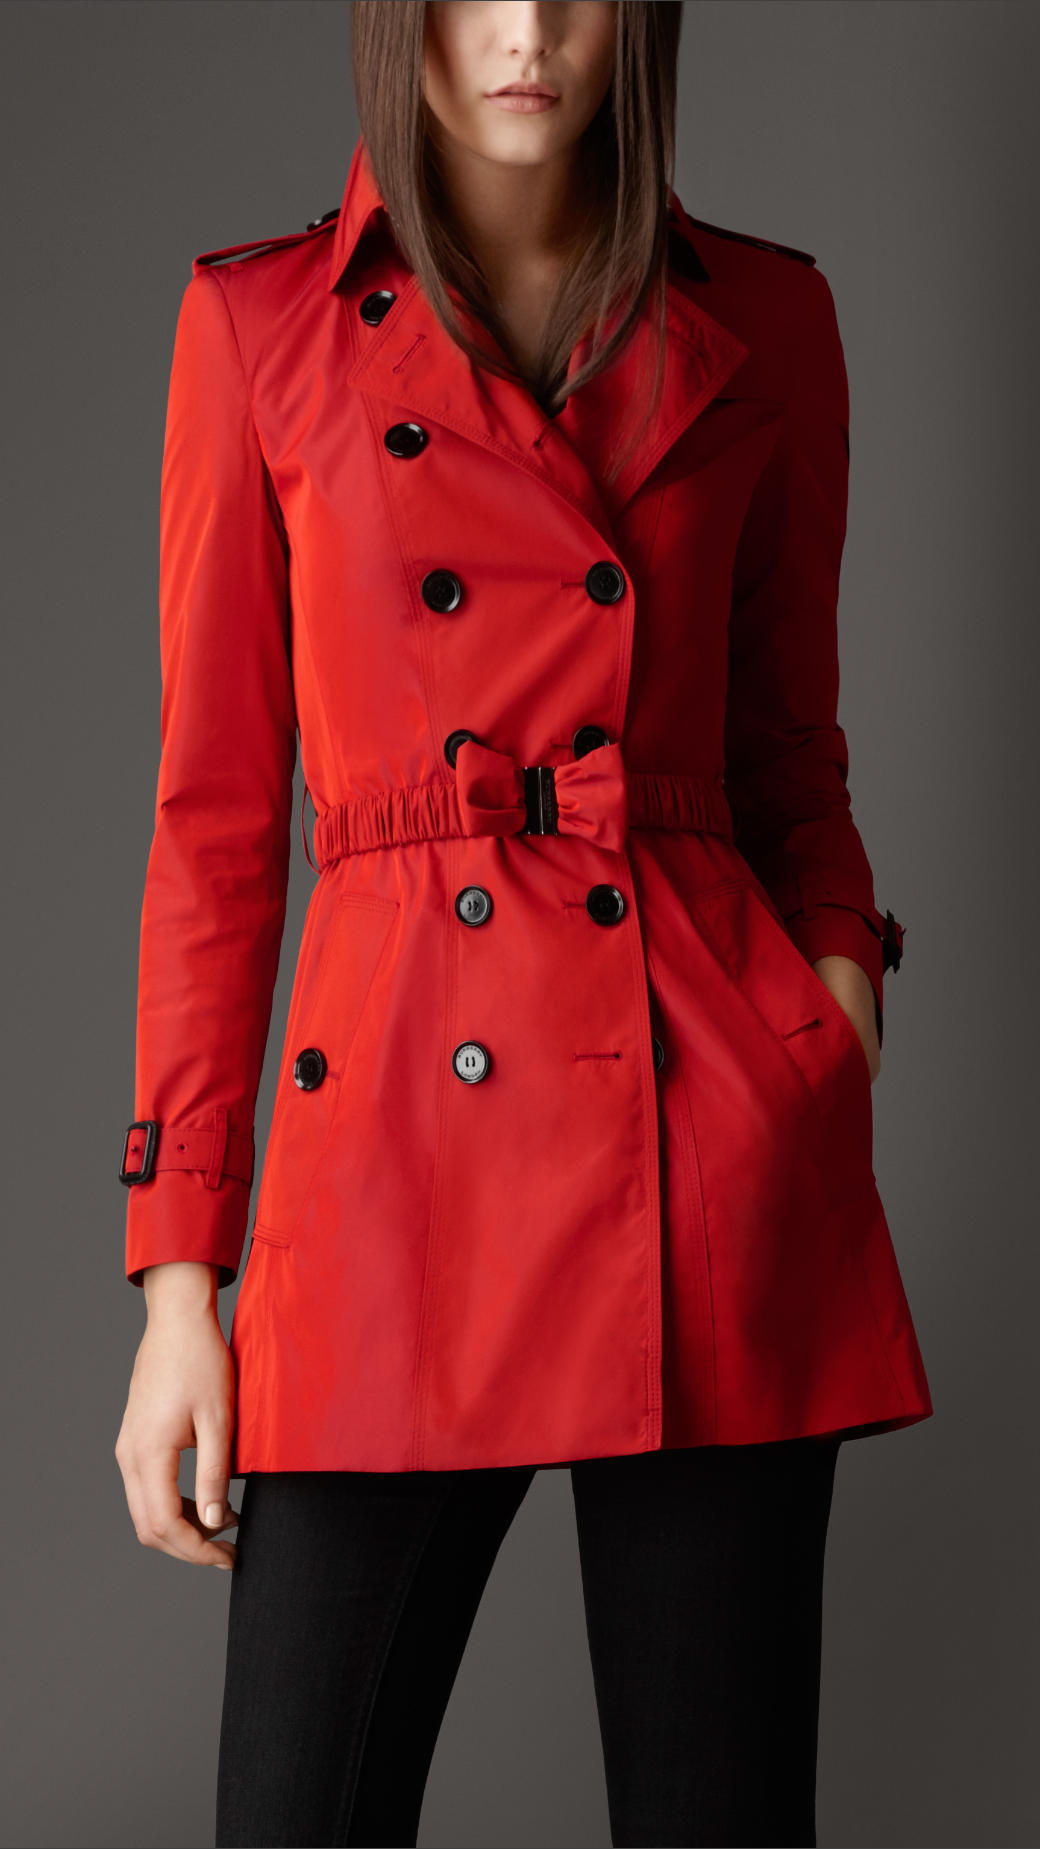 burberry trench coat belt replacement